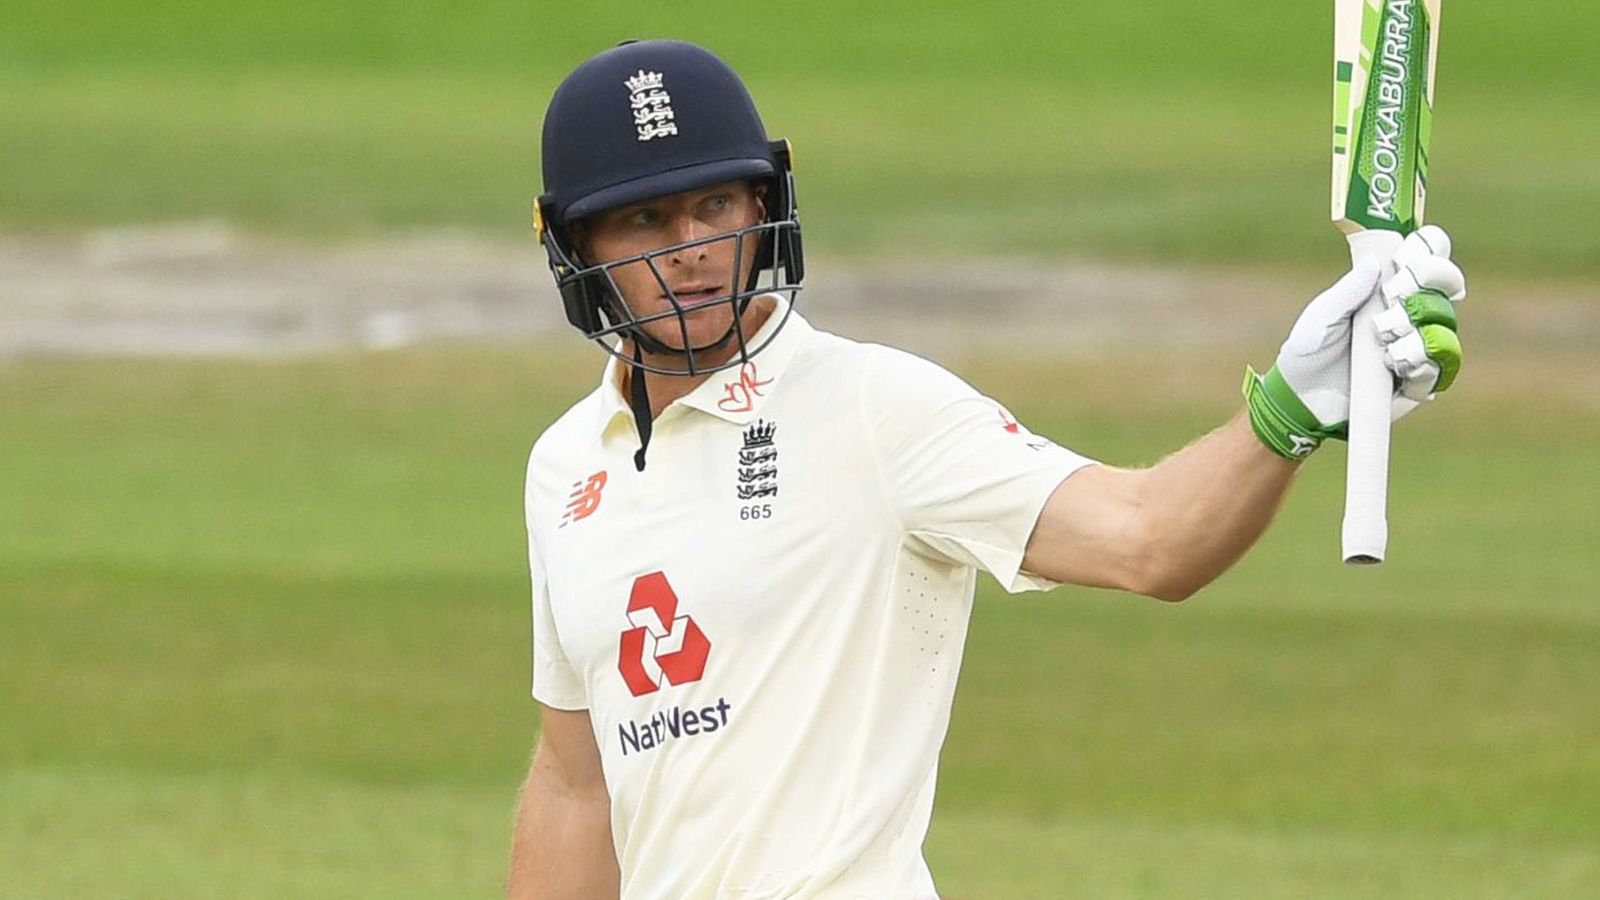 England's Jos Buttler says he has felt under pressure after lean run with the bat in Test cricket | Cricket News | Sky Sports